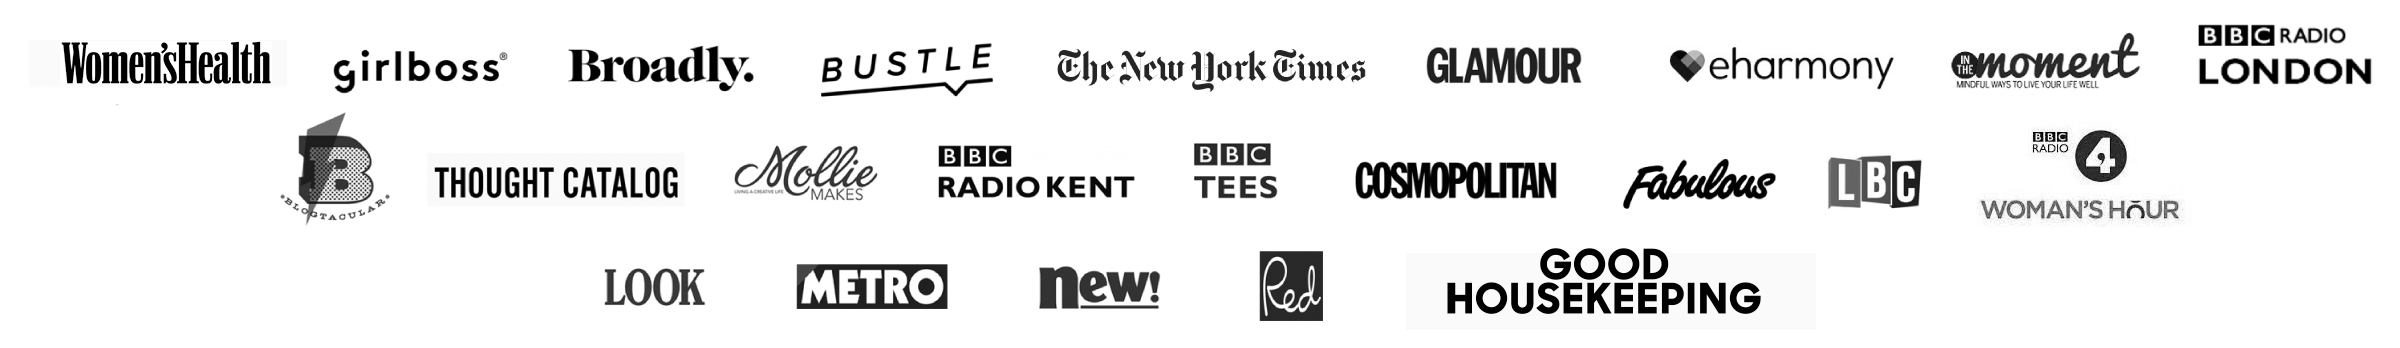 Natalie Lue media appearances, including The New York Times and BBC logos